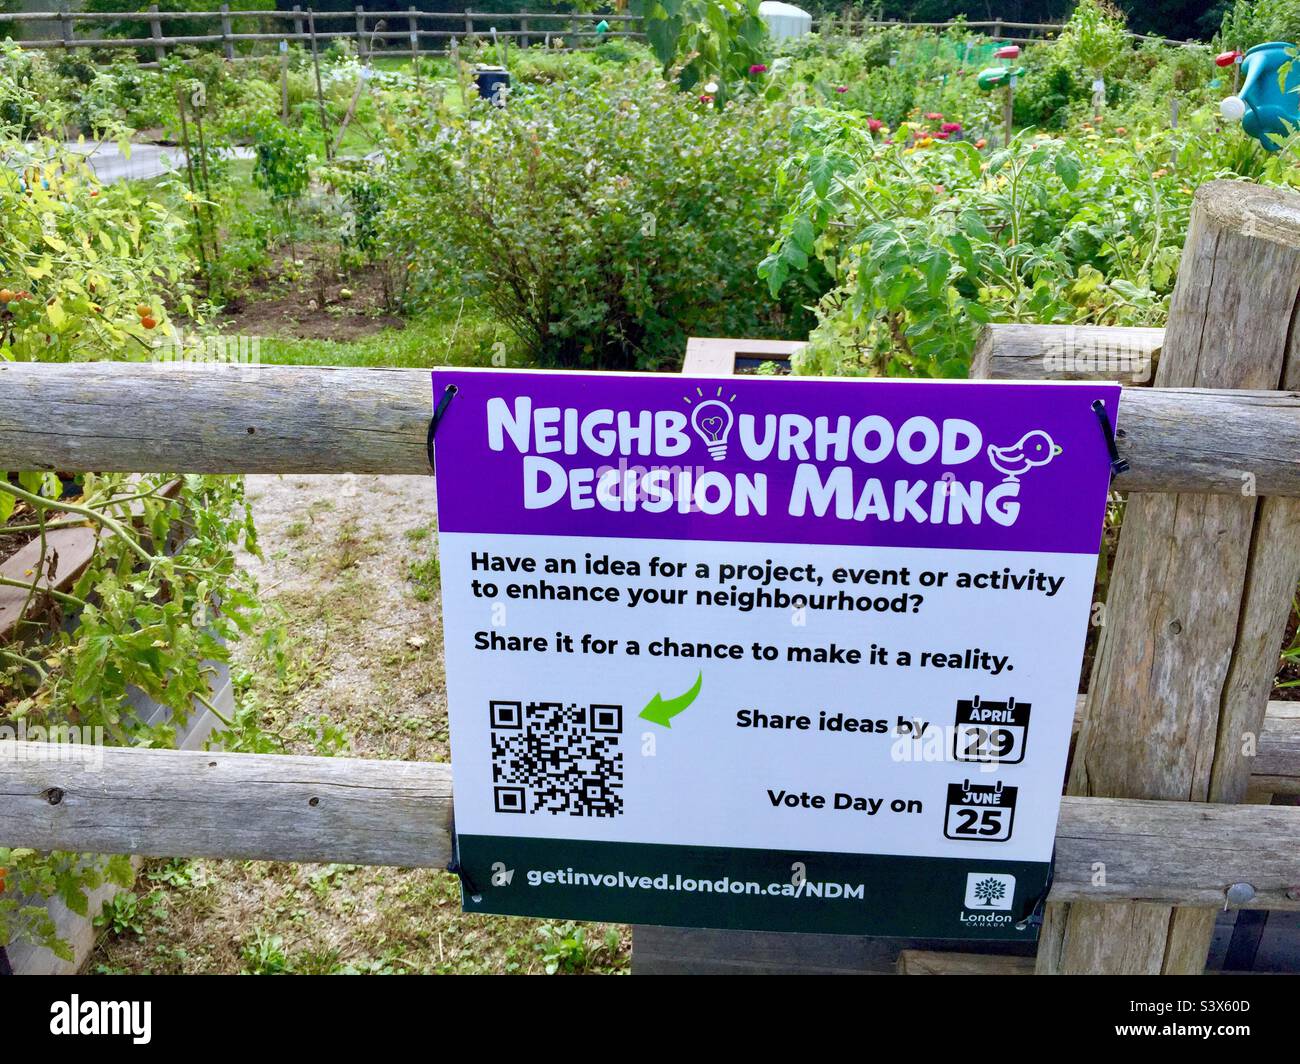 Grassroots democracy. Sign outside a community garden. Decentralized decision making. Participatory. Stock Photo